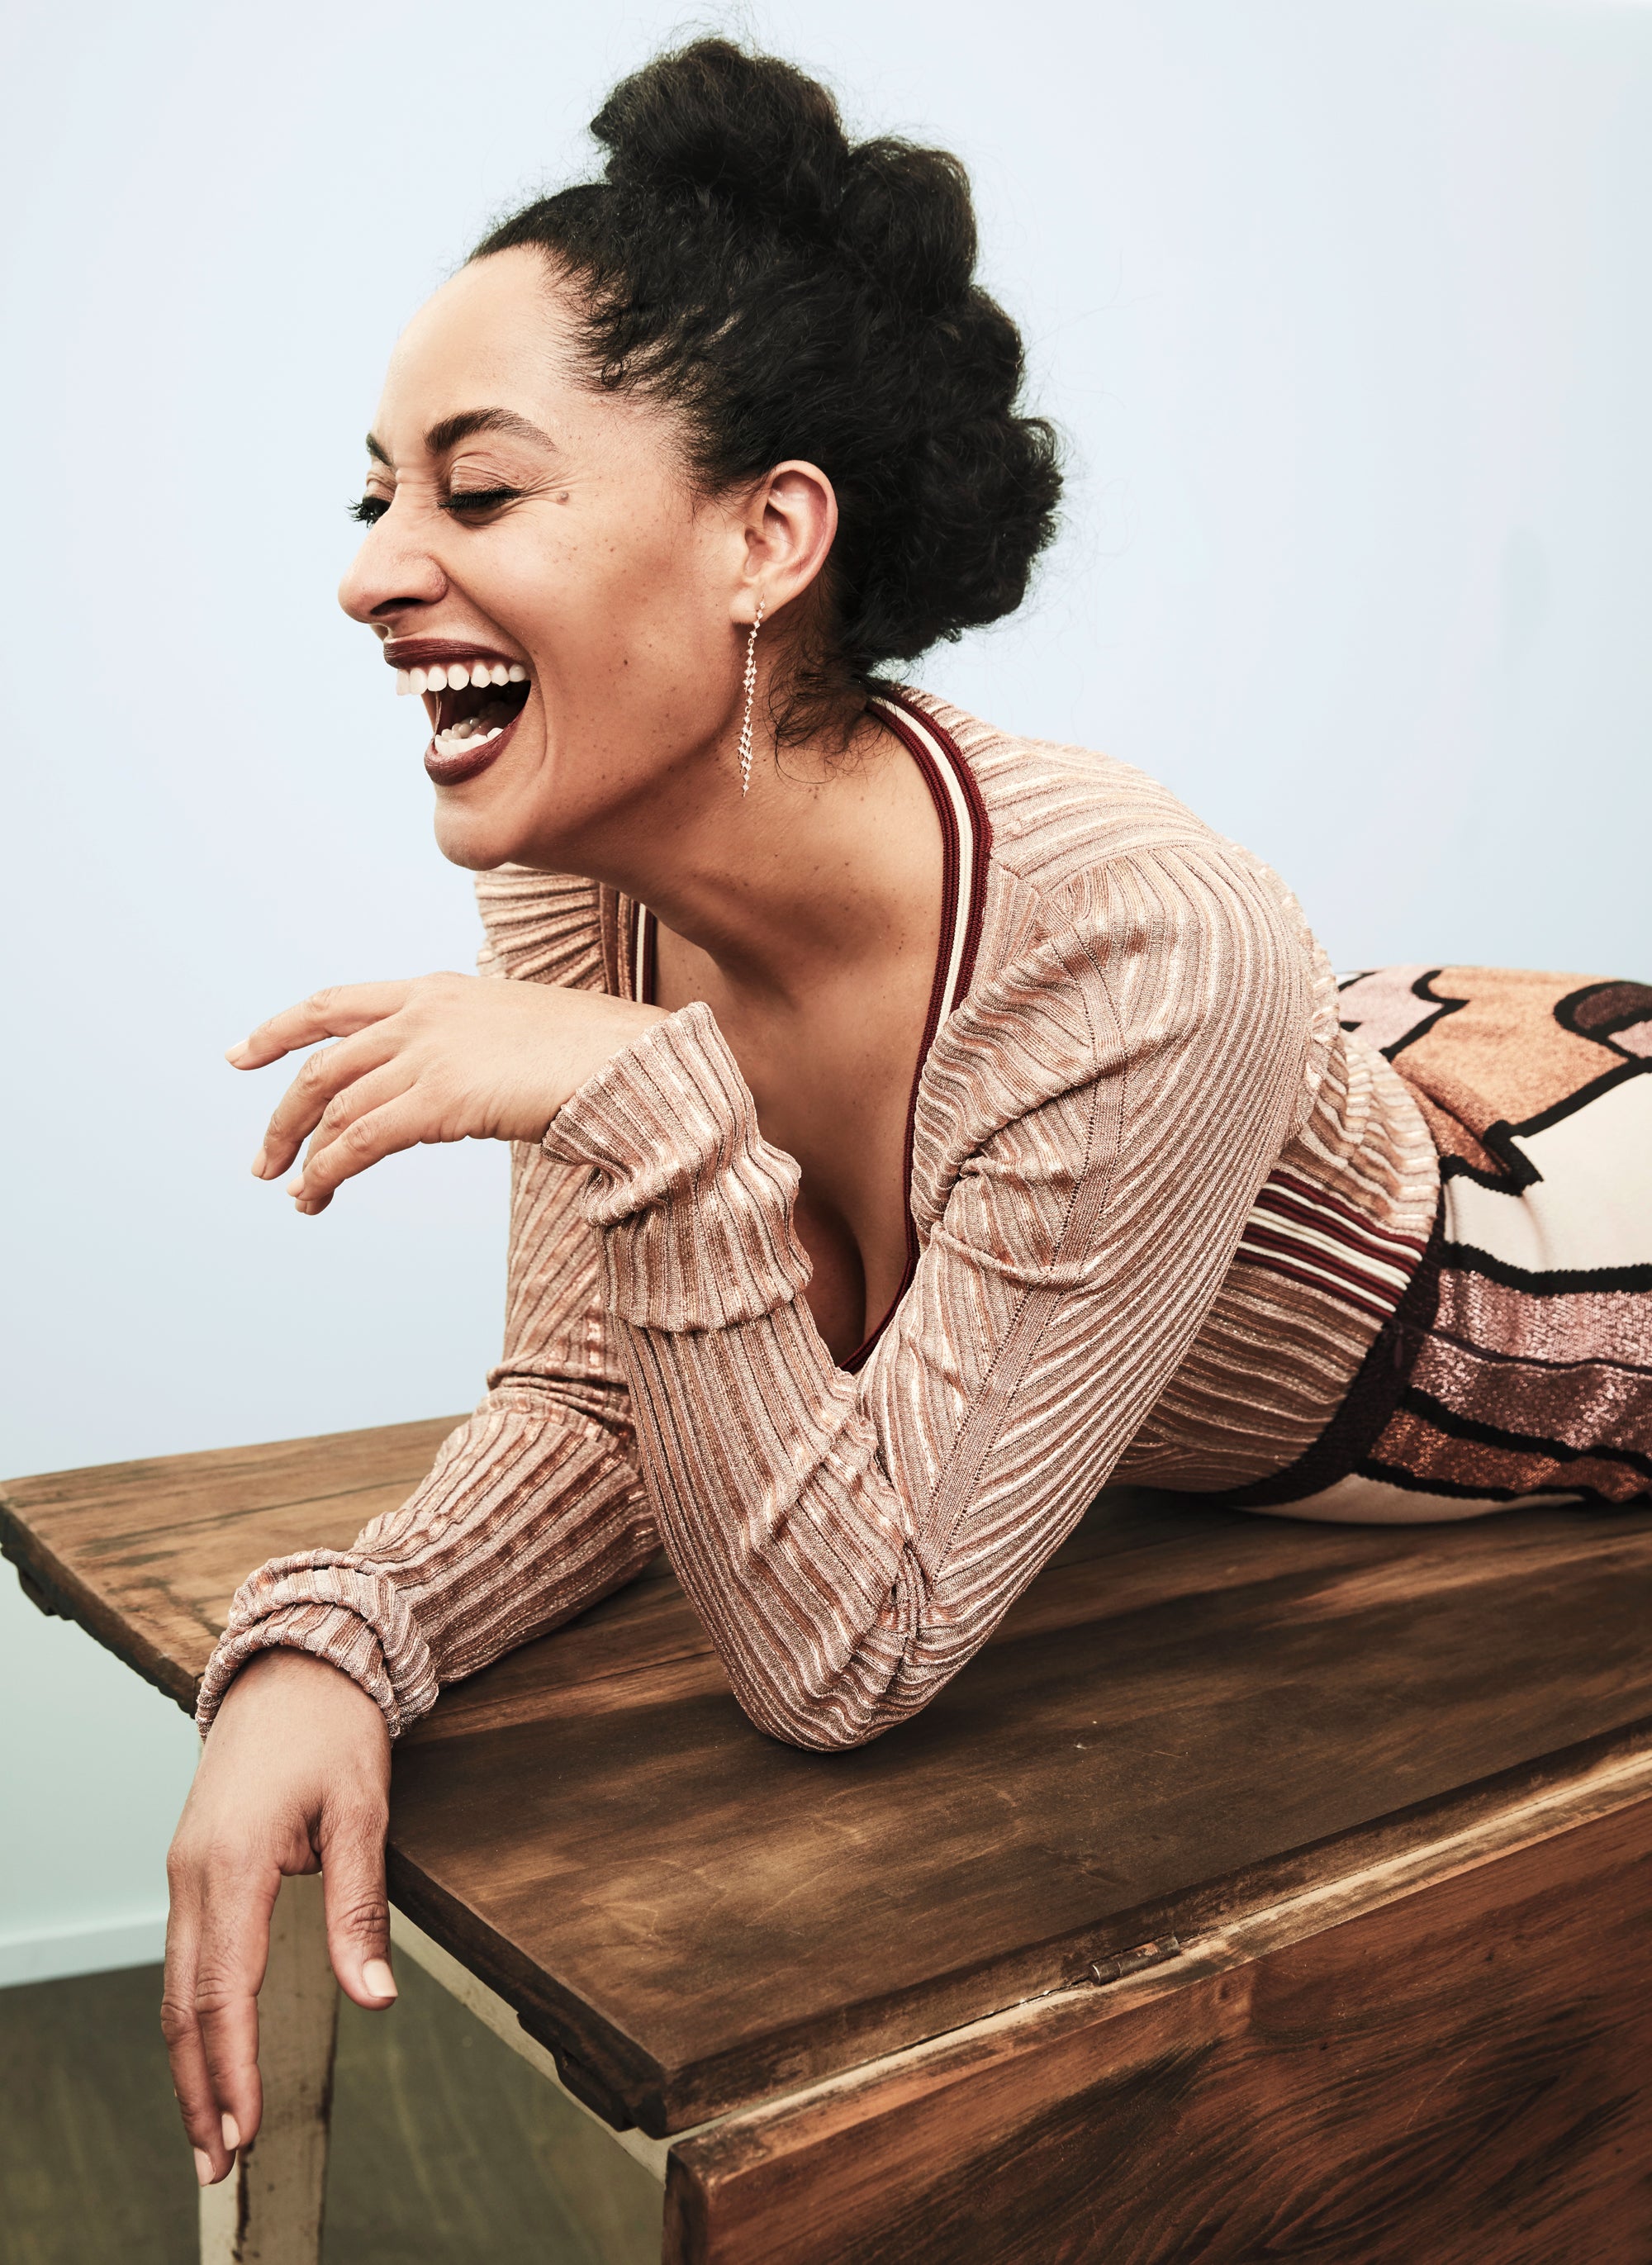 Tracee Ellis Ross Wears Lipstick To The Gym—Here's Why